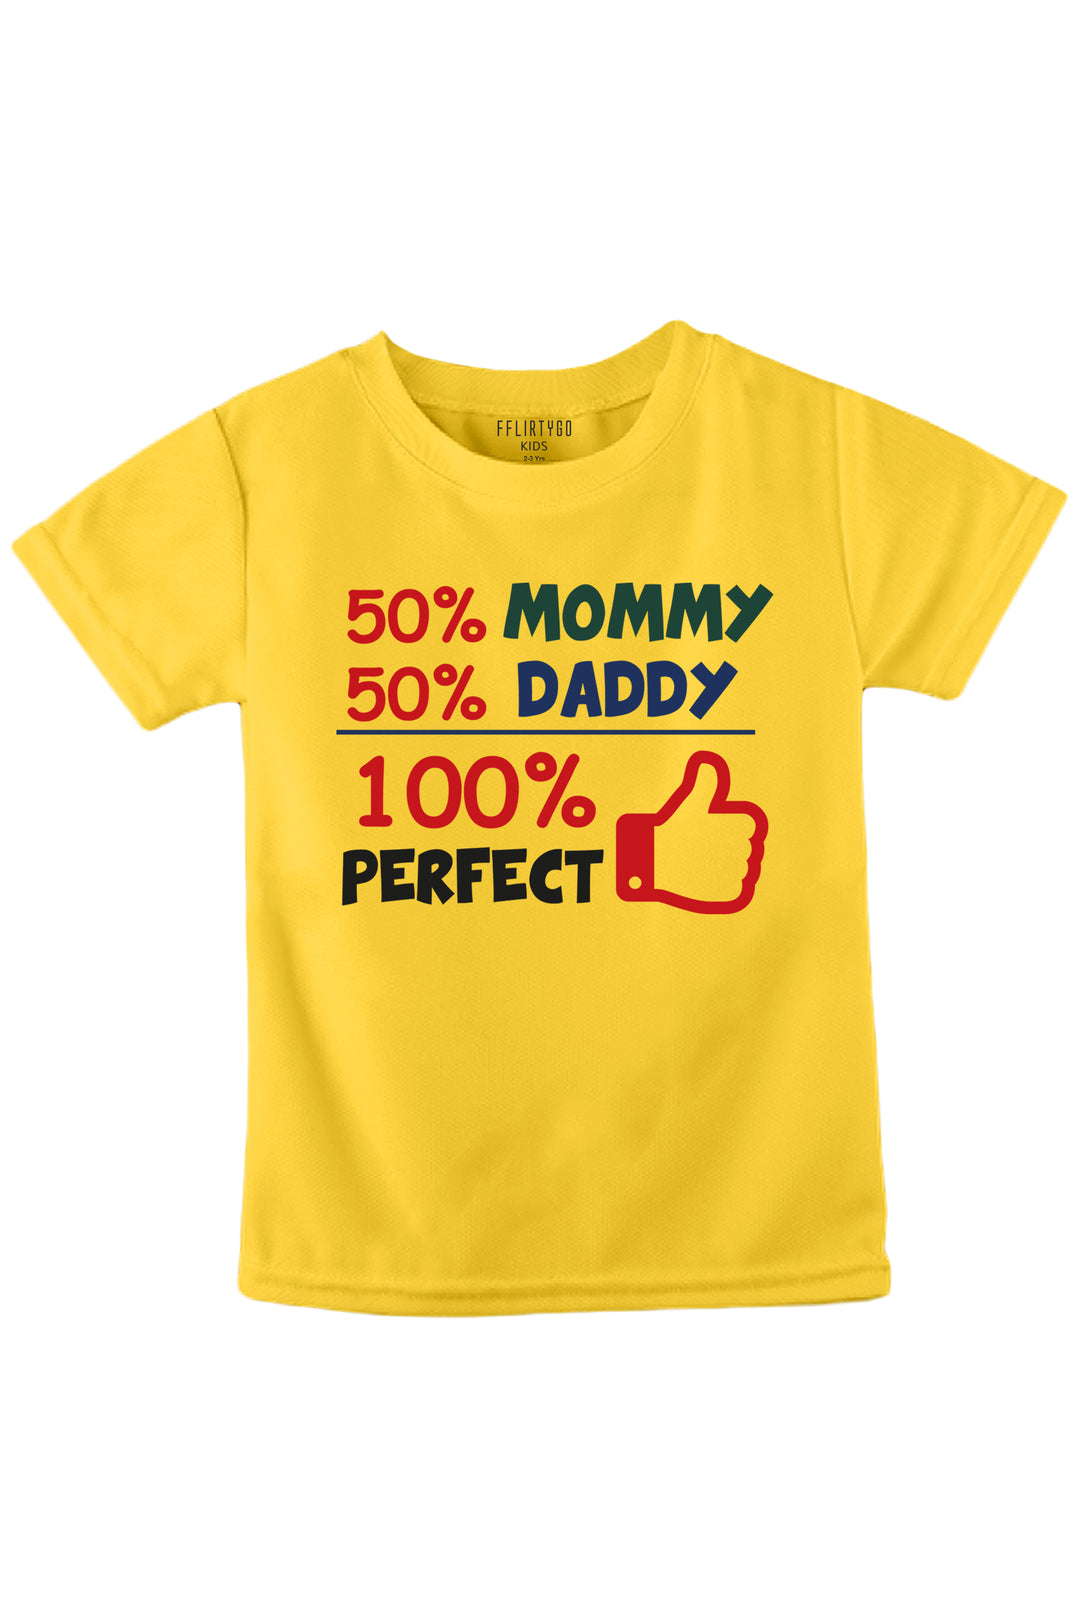 50 % Mommy 50% Daddy 100% Perfect